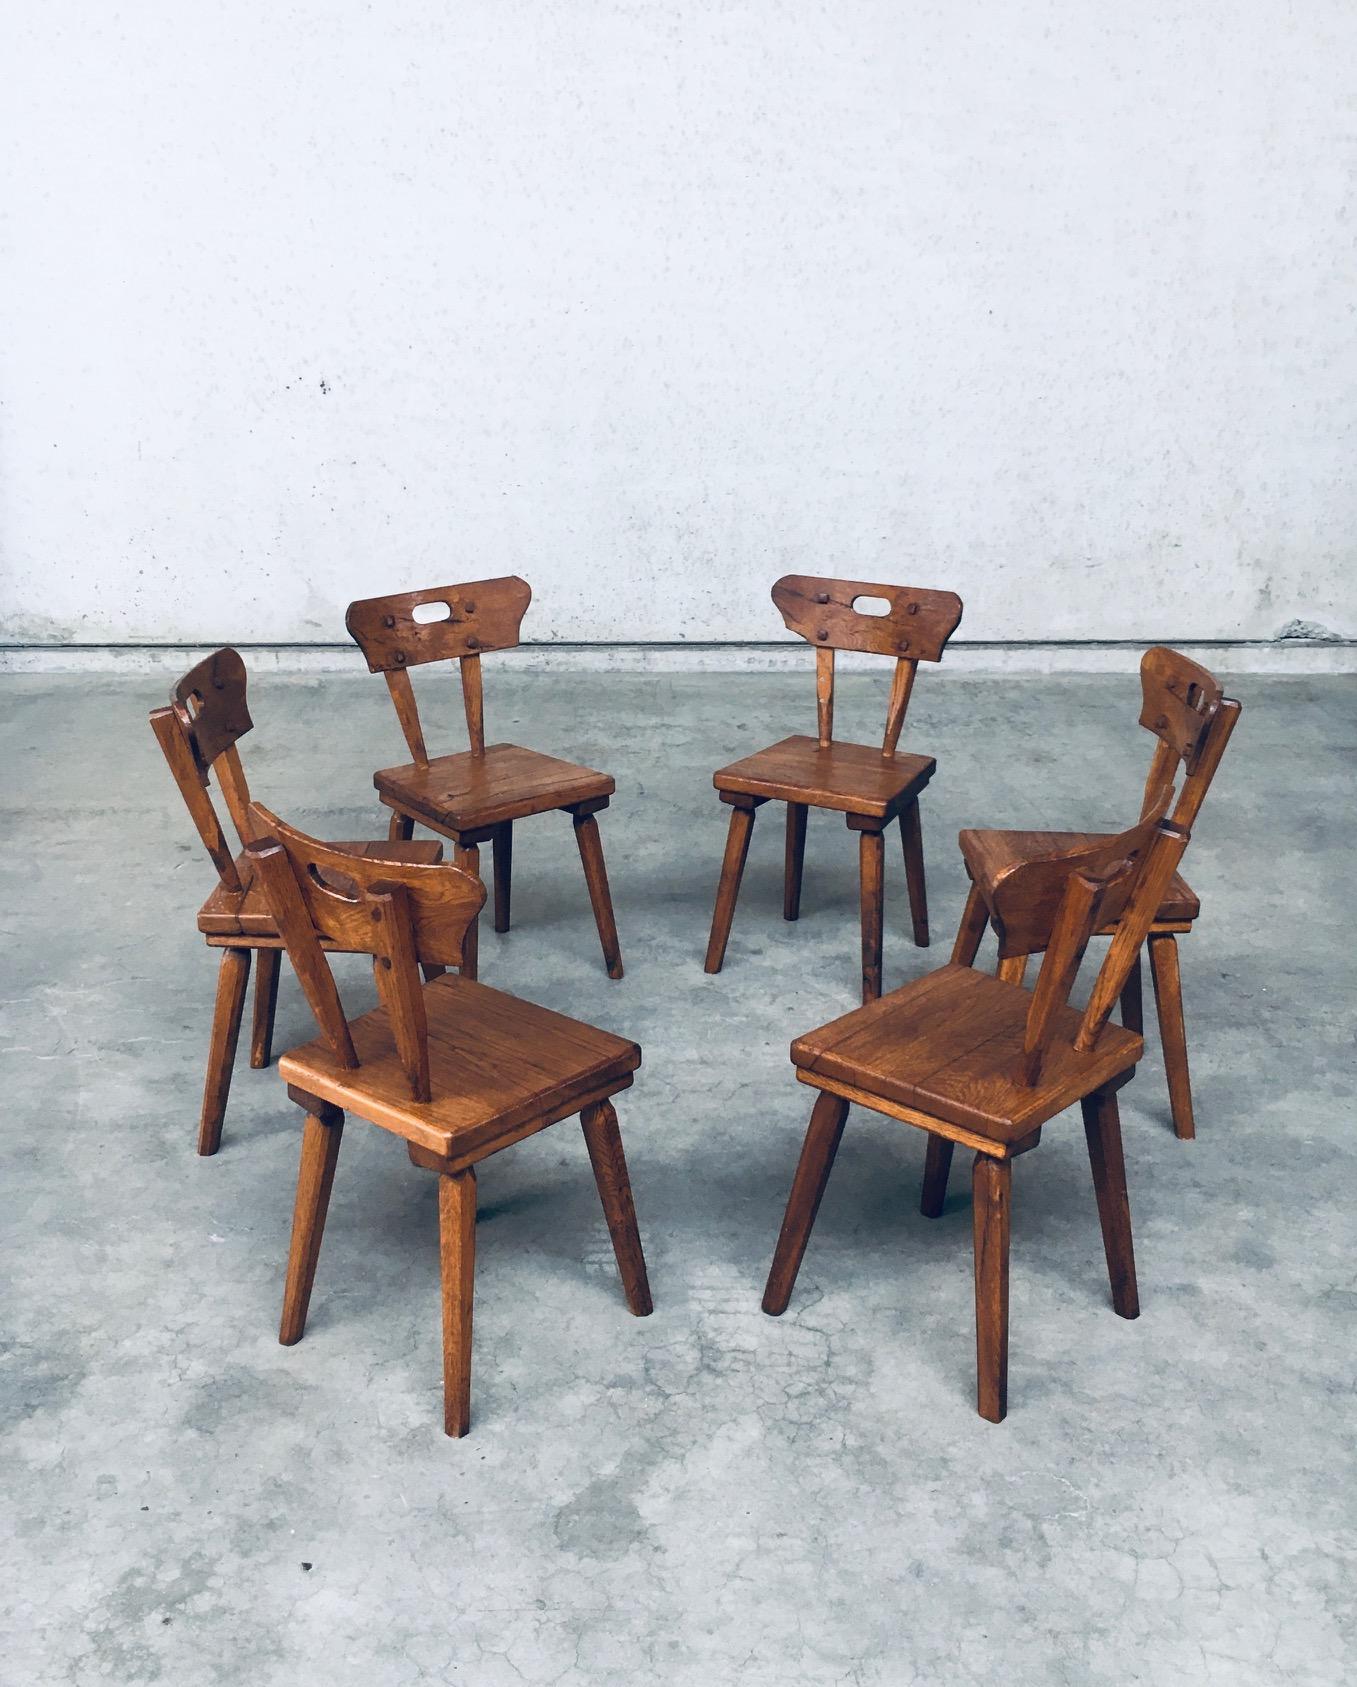 Handcrafted Folk Art Rustic Oak Dining Chair Set, France, 1940s For Sale 1